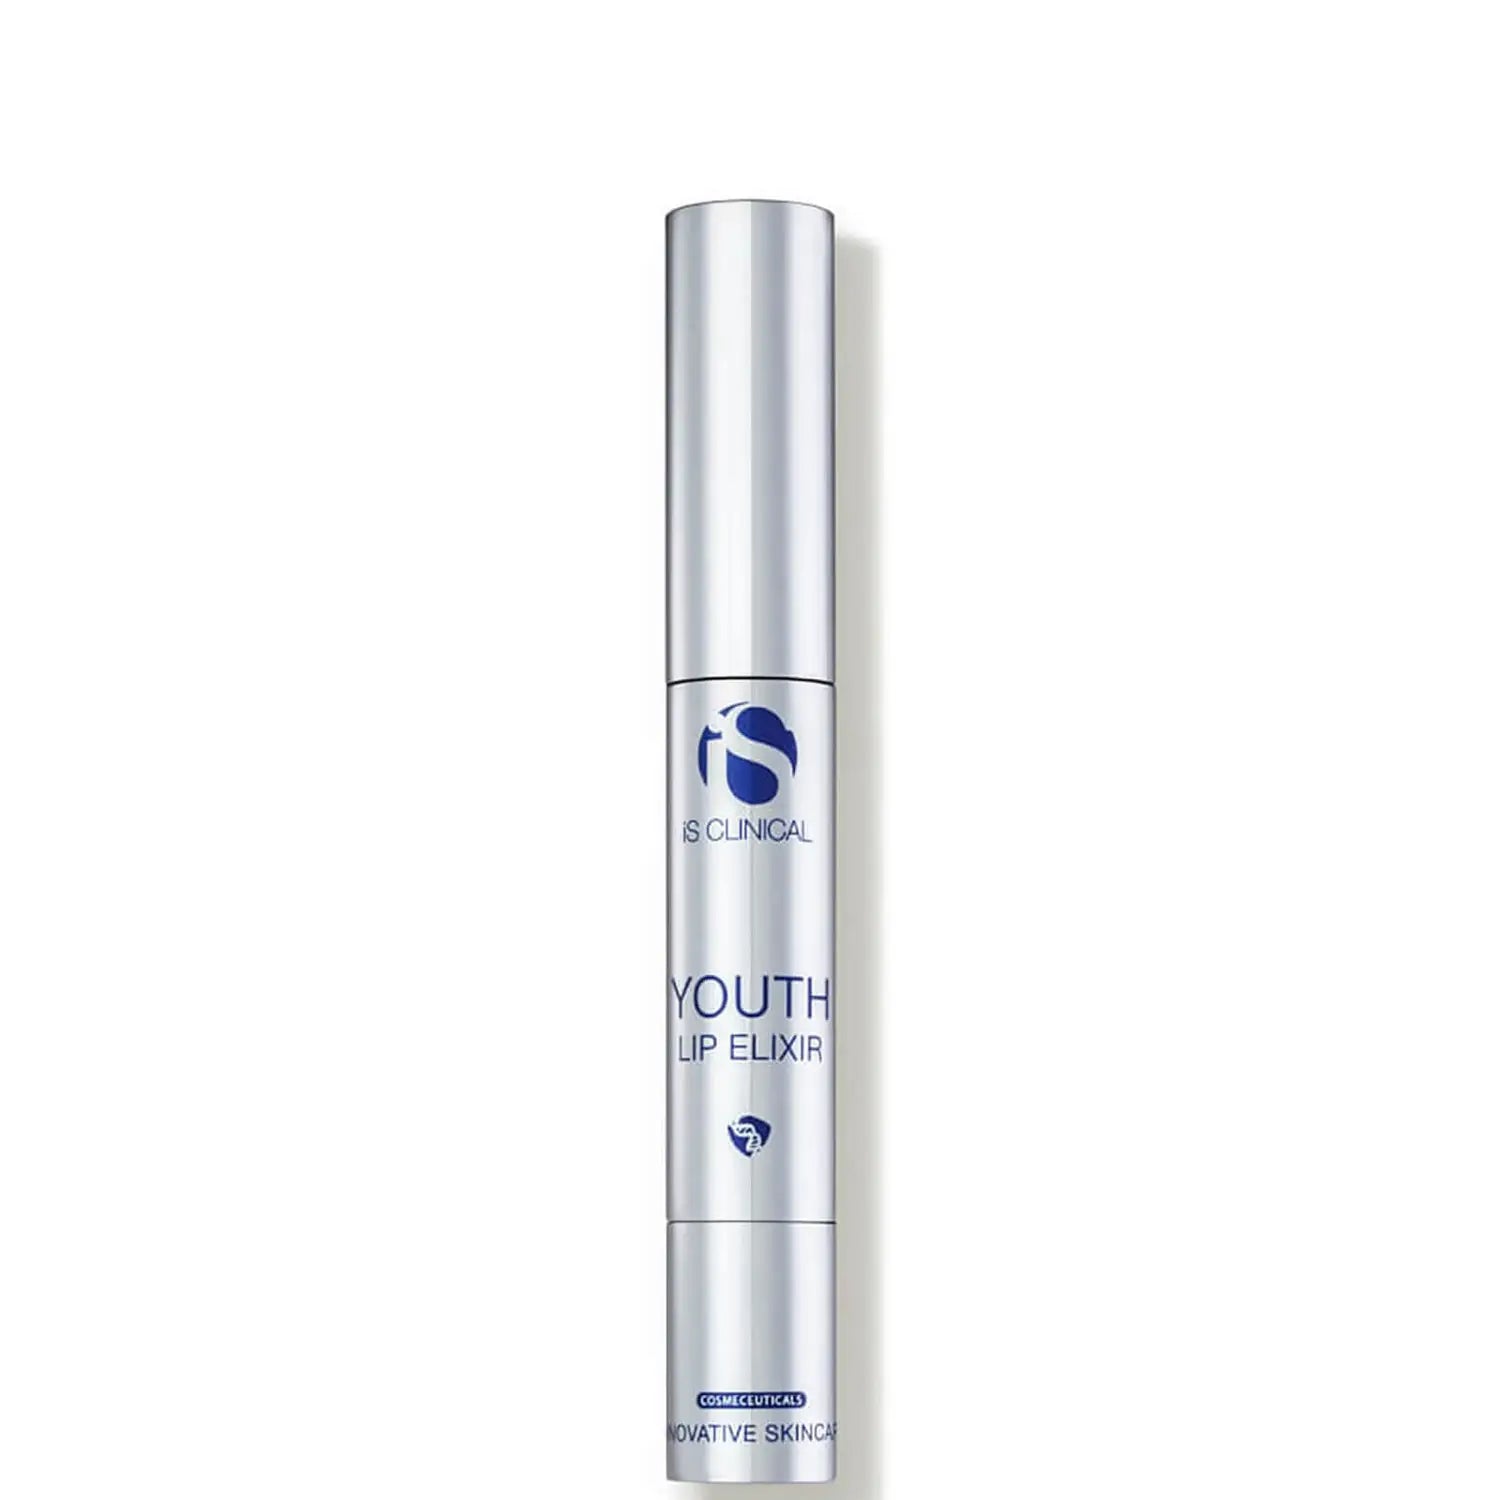 iSClinical Youth Lip Elixir